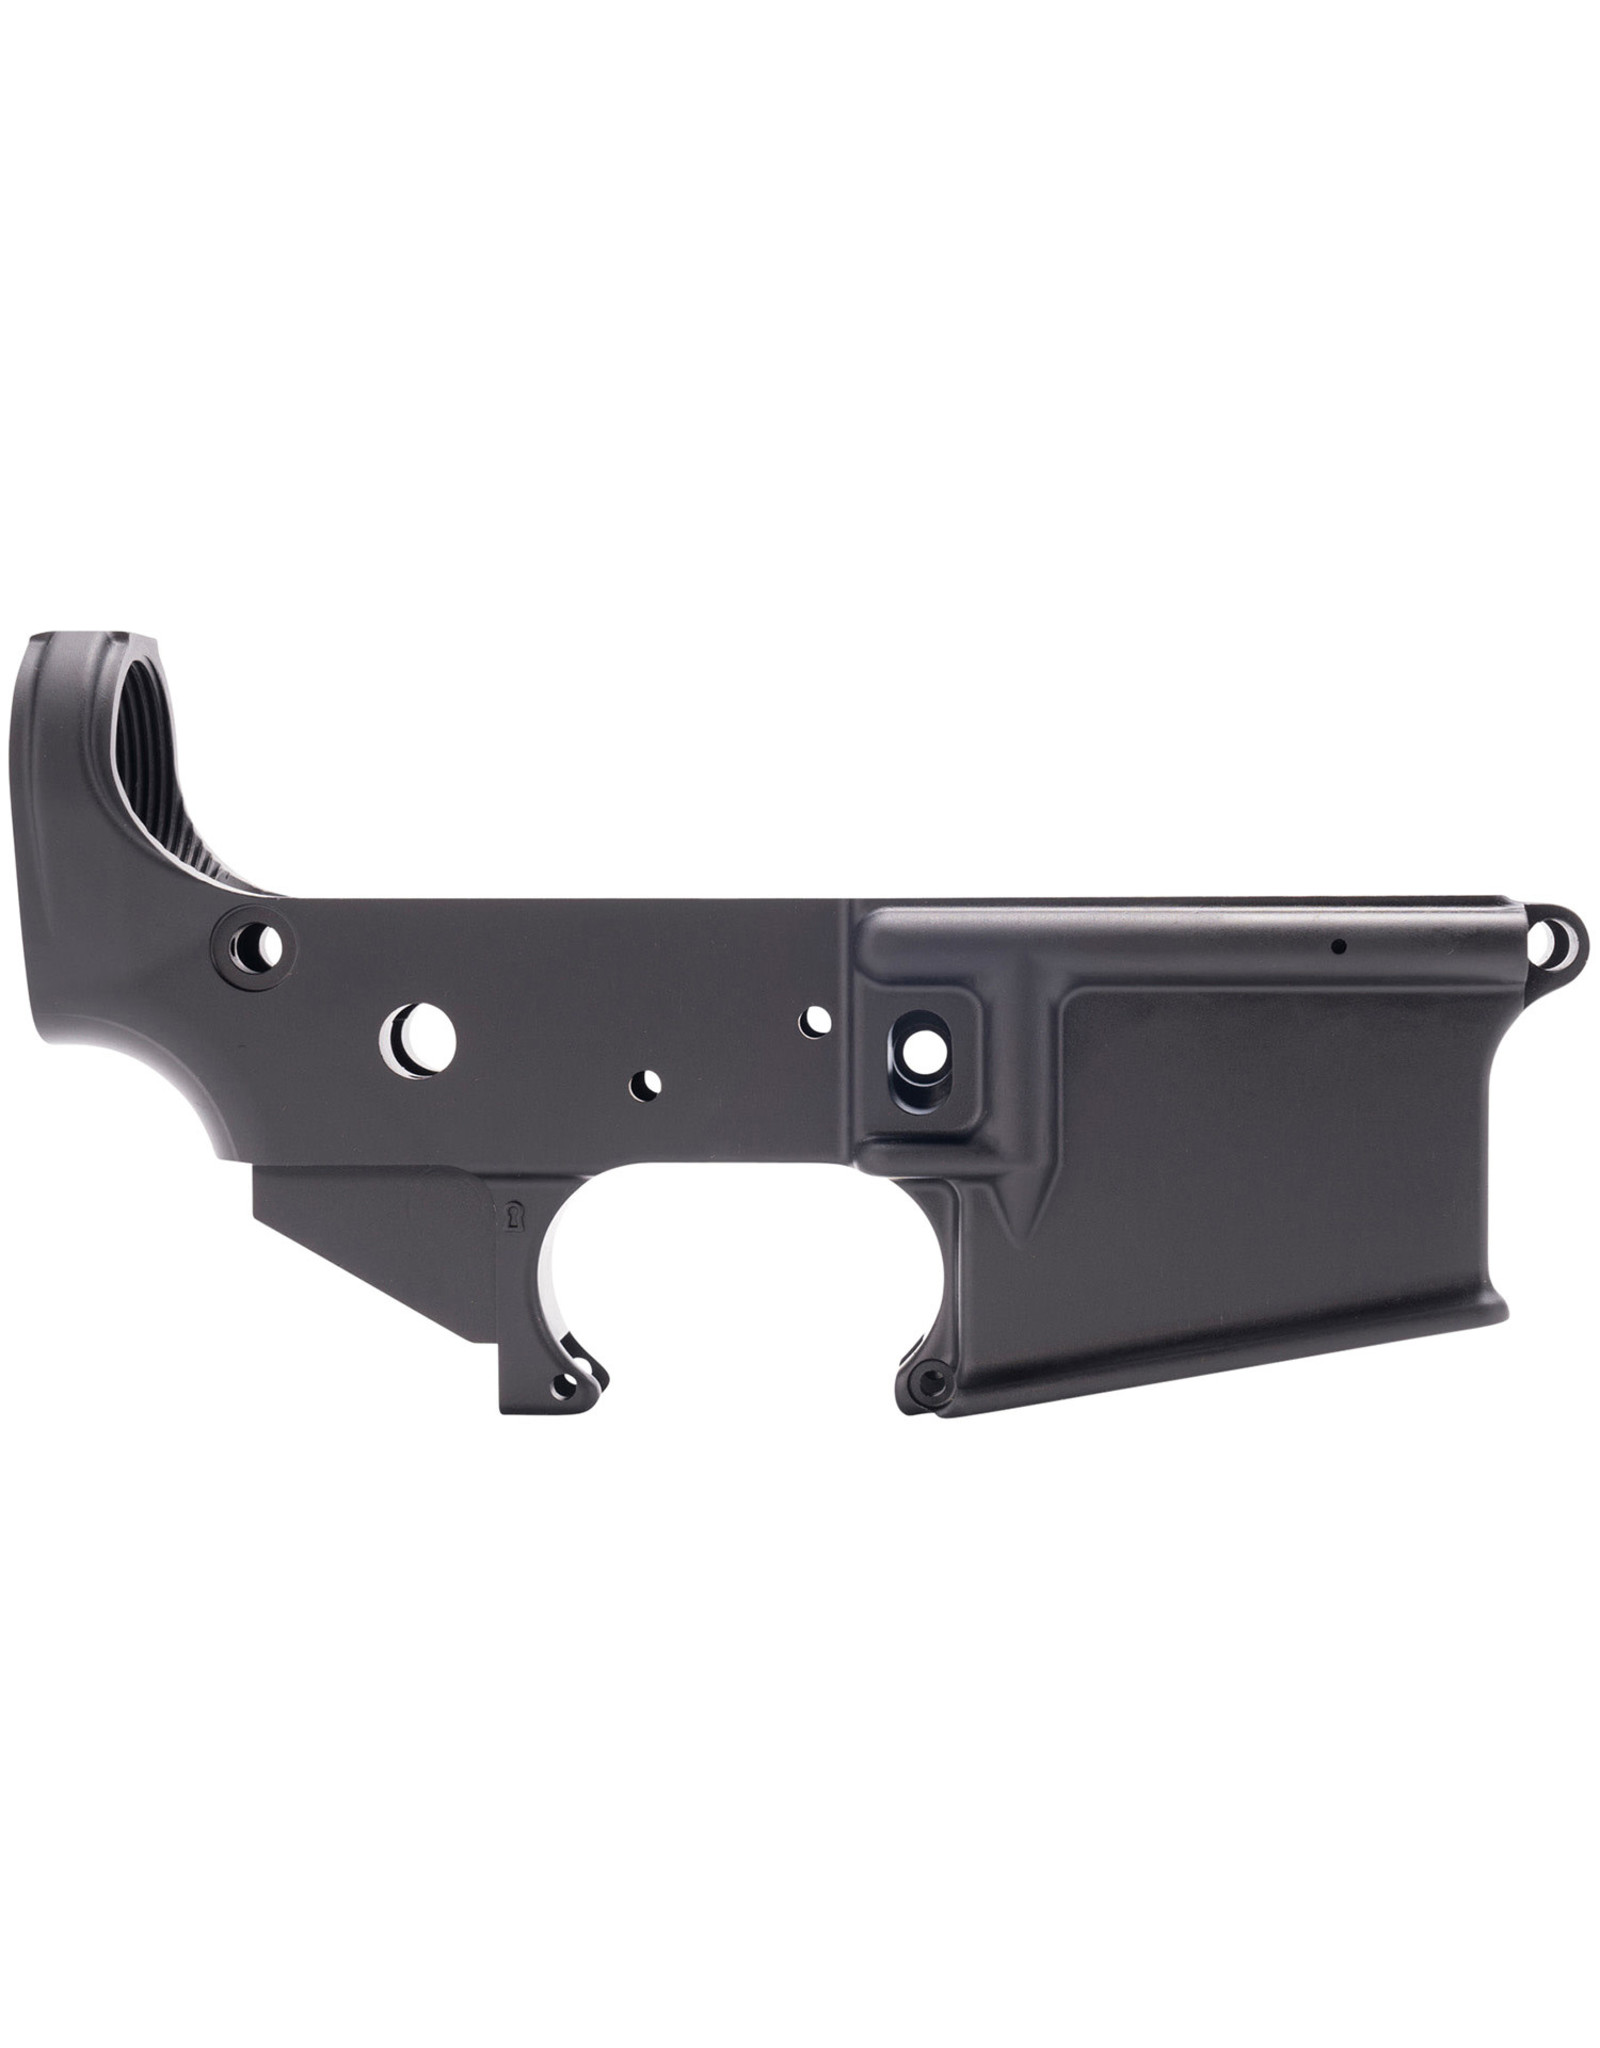 Anderson Mfg. AM-15 Stripped Lower Receiver